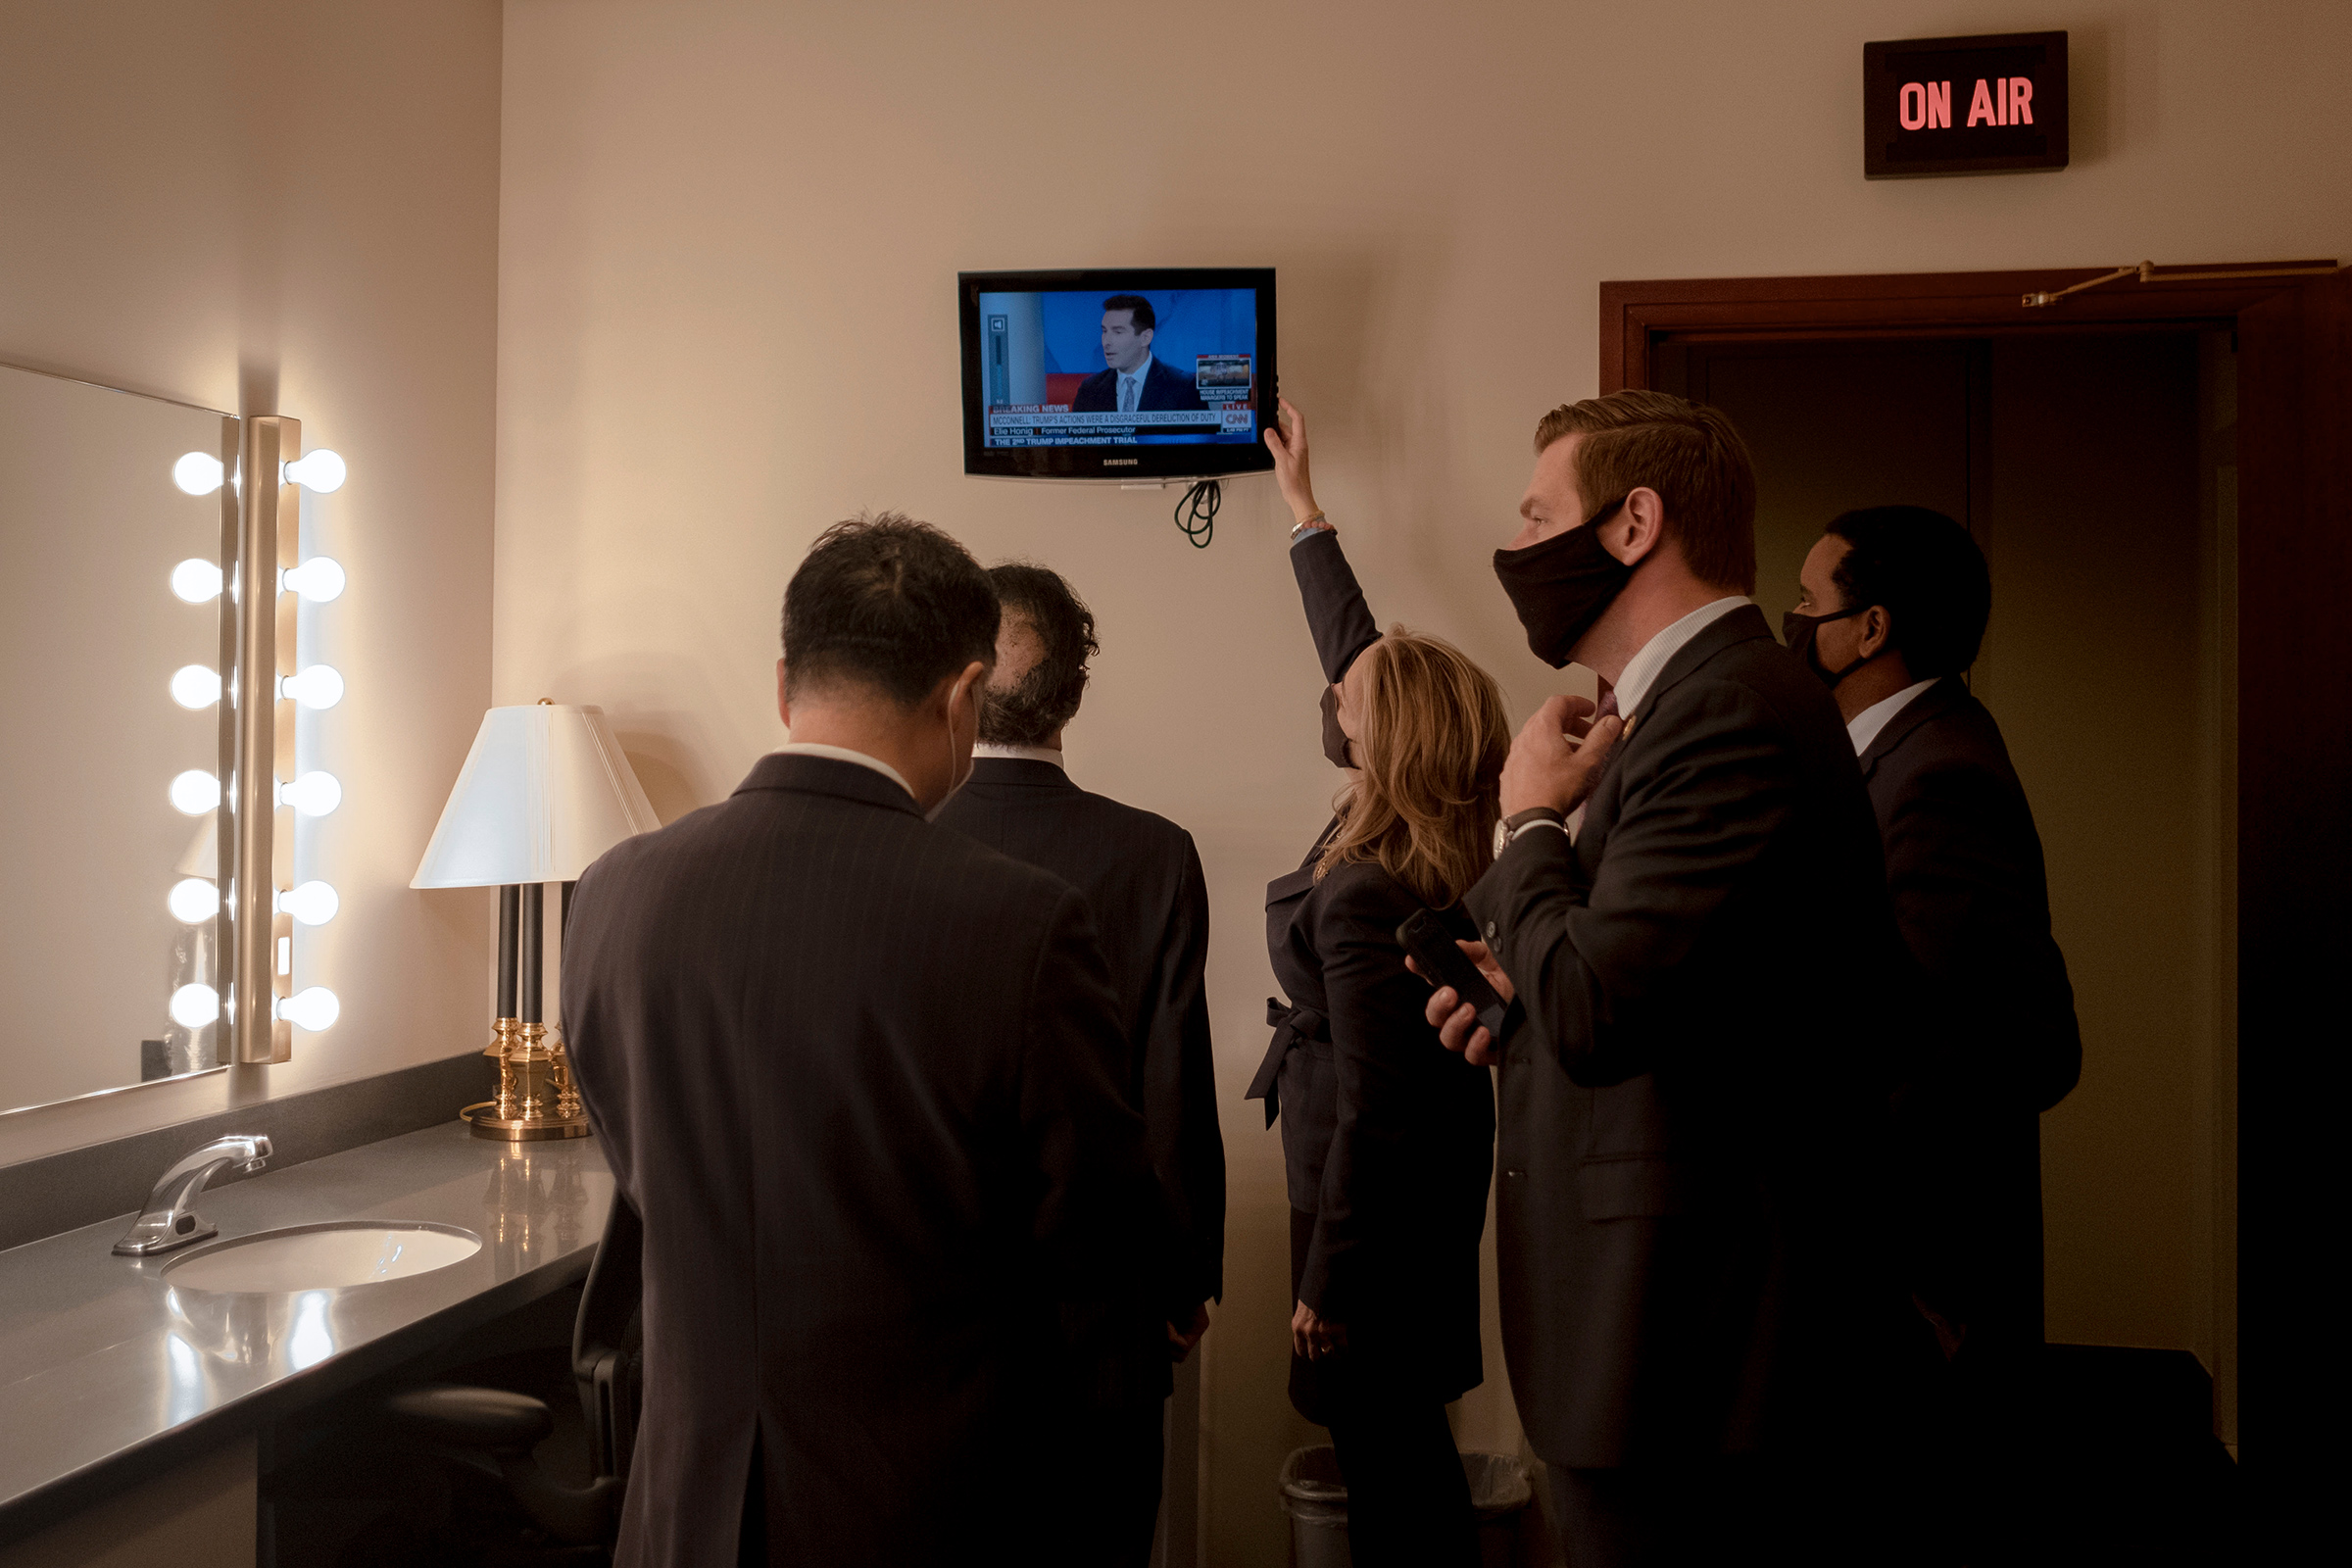 House managers watch the news as they prepare to speak to the press on Feb. 13, 2021. (Gabriella Demczuk for TIME)